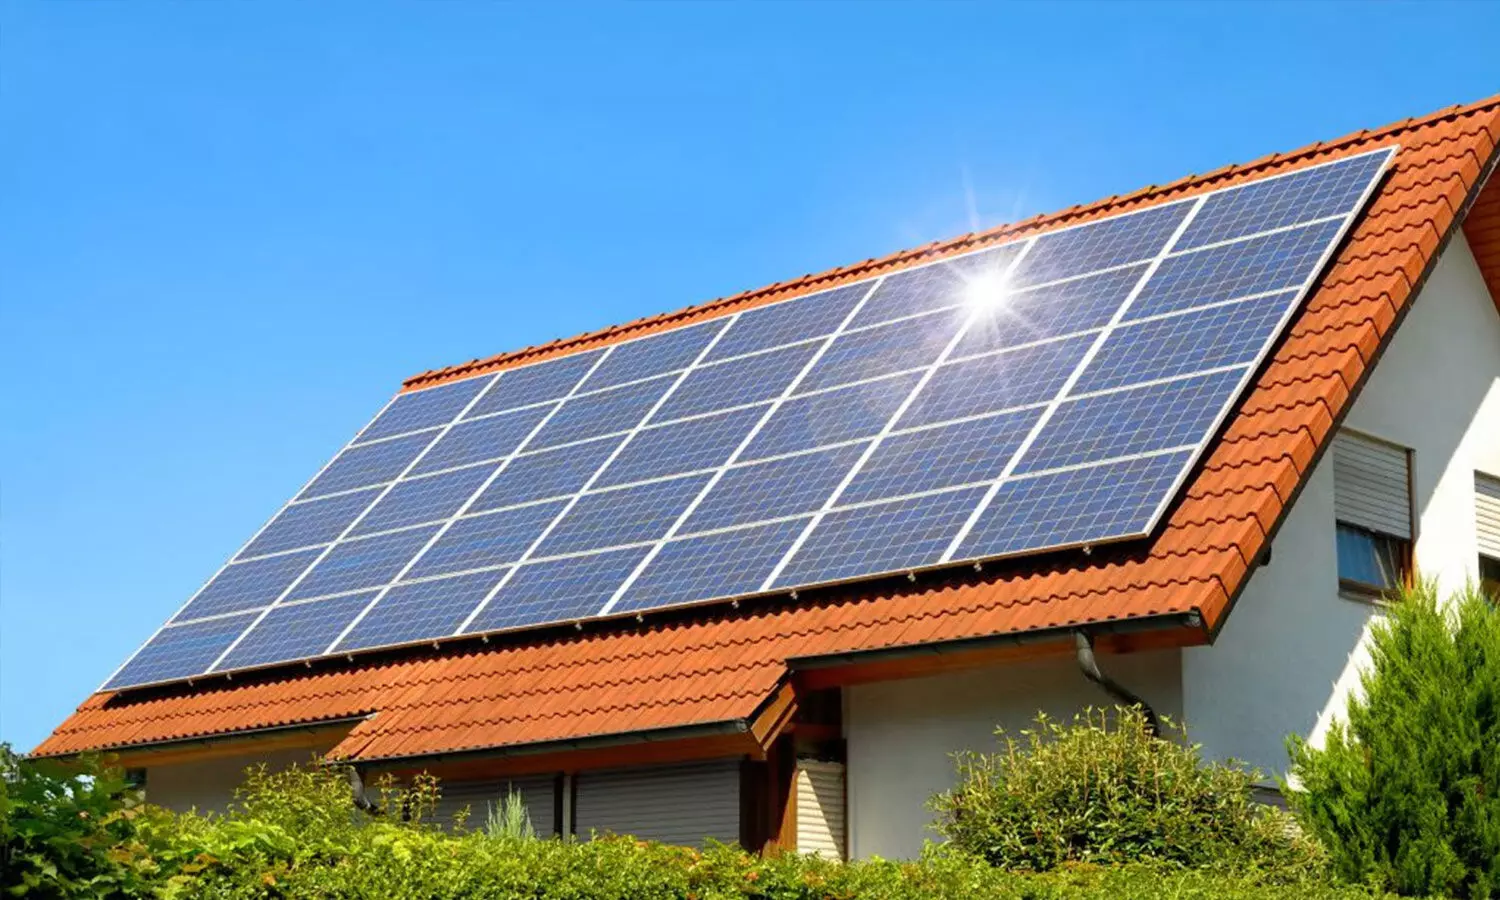 Rooftop Solar Scheme Registration: A Big Opportunity to Save Electricity Bills